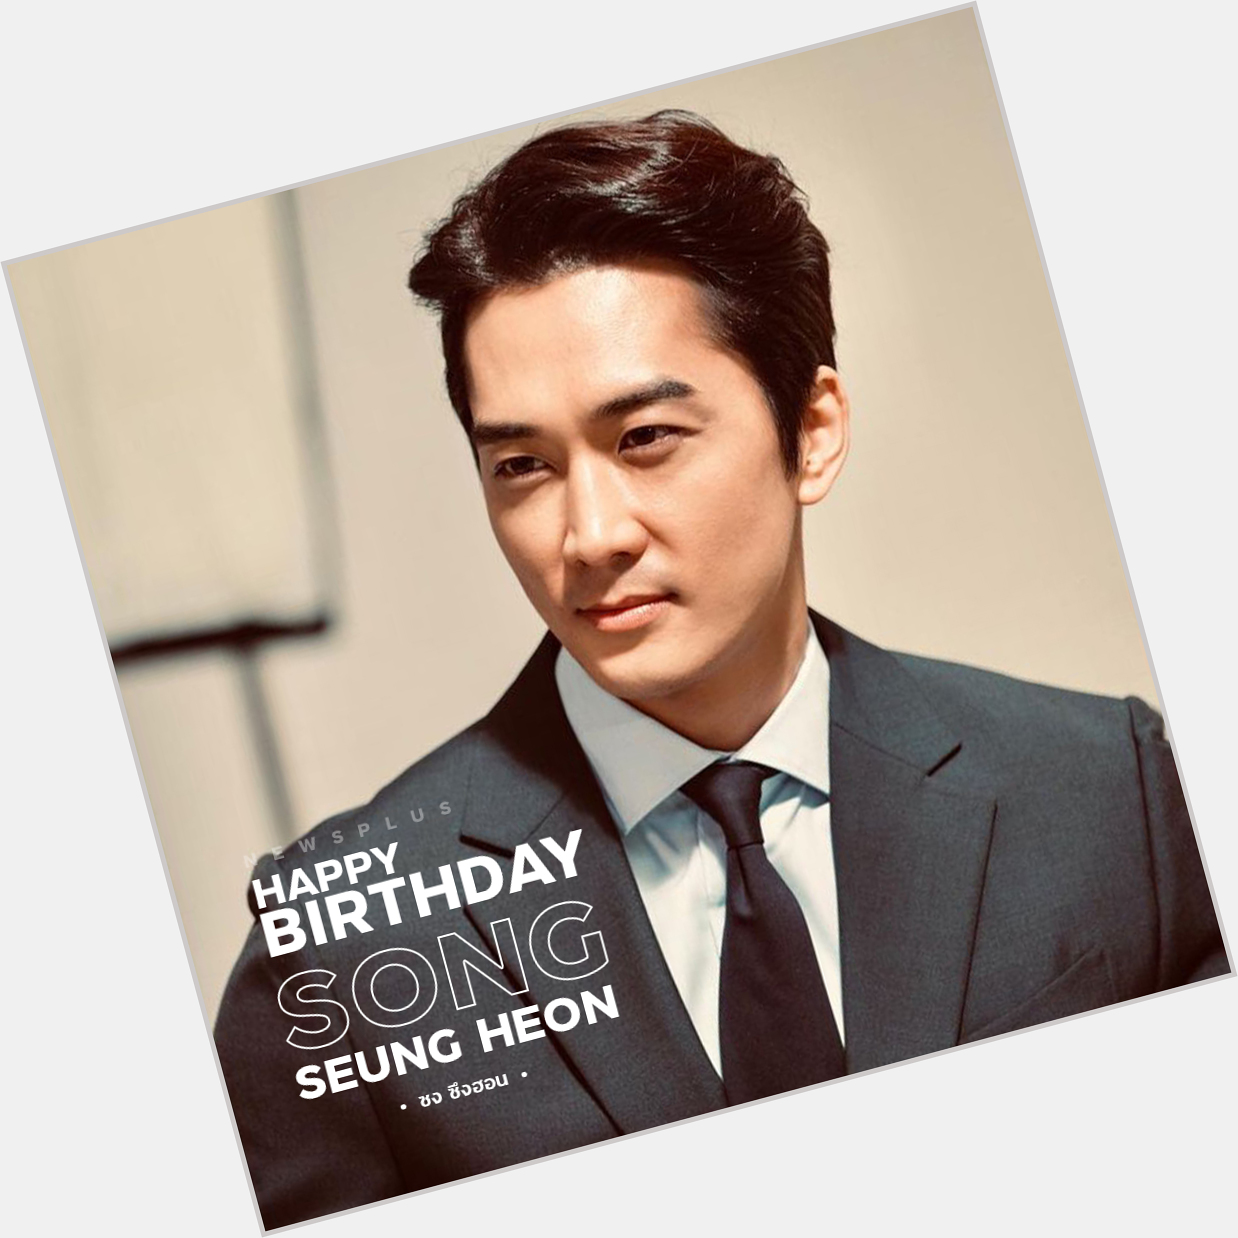 Happy Birthday Song Seung Heon  